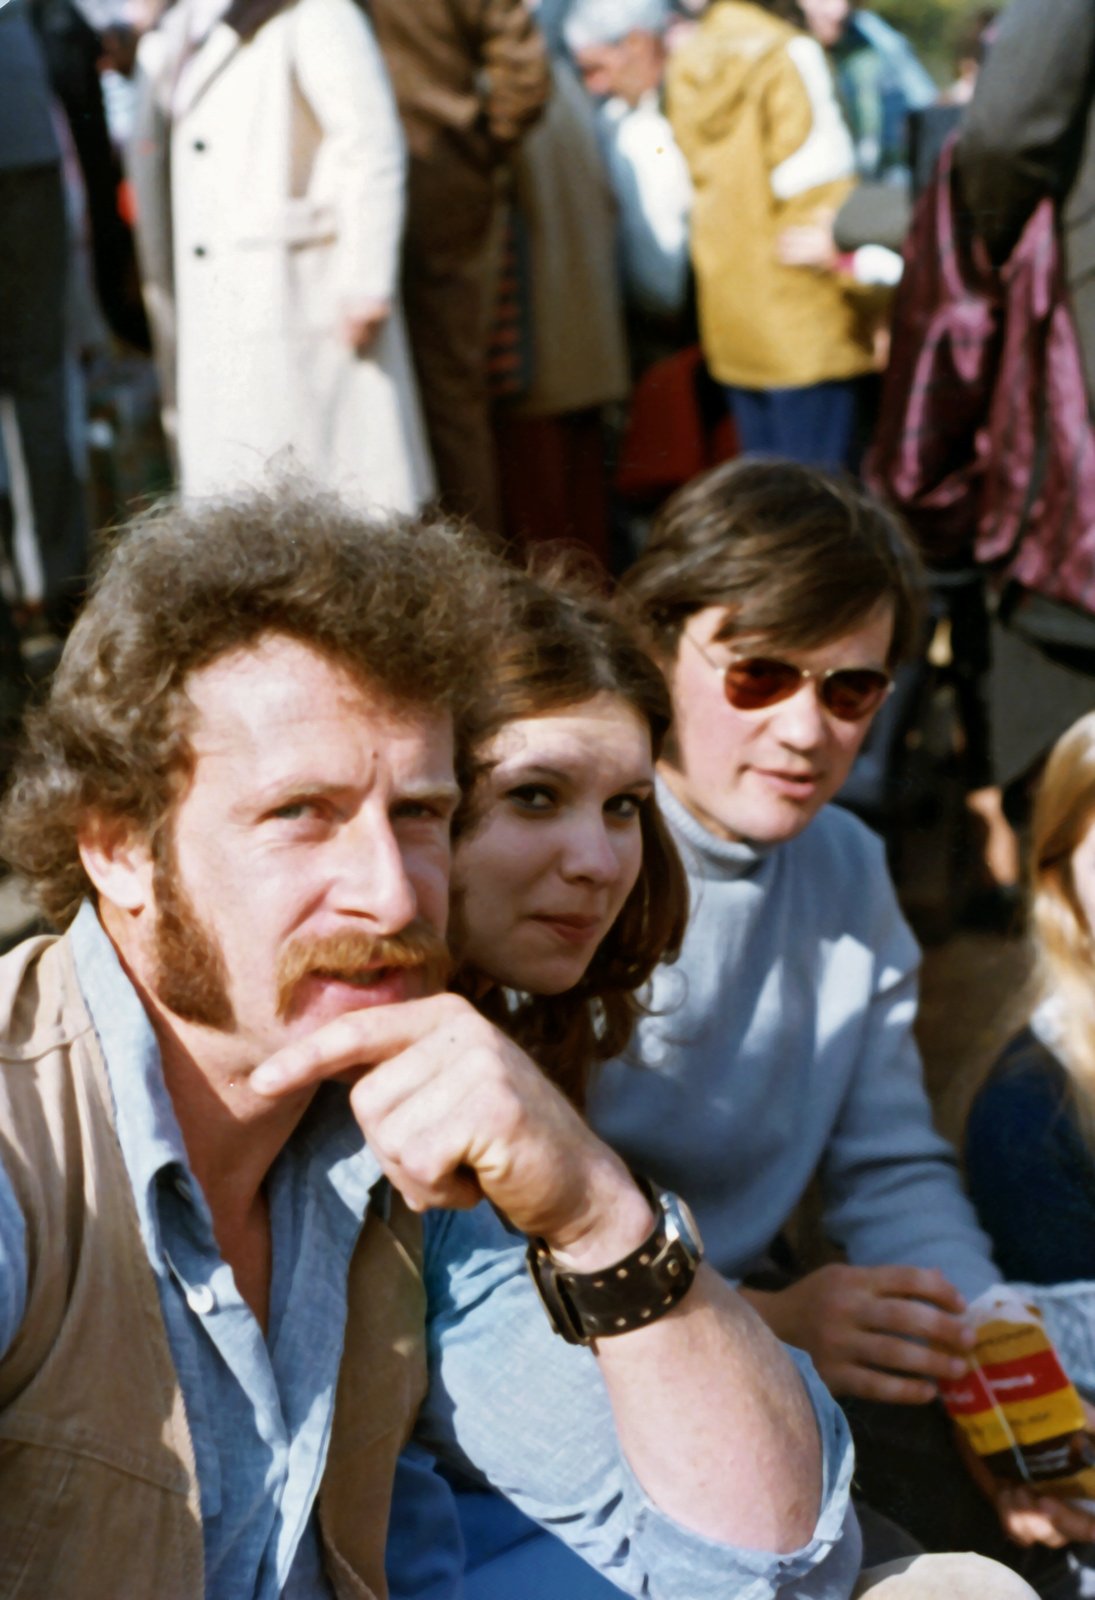 Mike Dwyer, Gerry Egan and his girlfriend, at a GAA match, San Francisco 1973